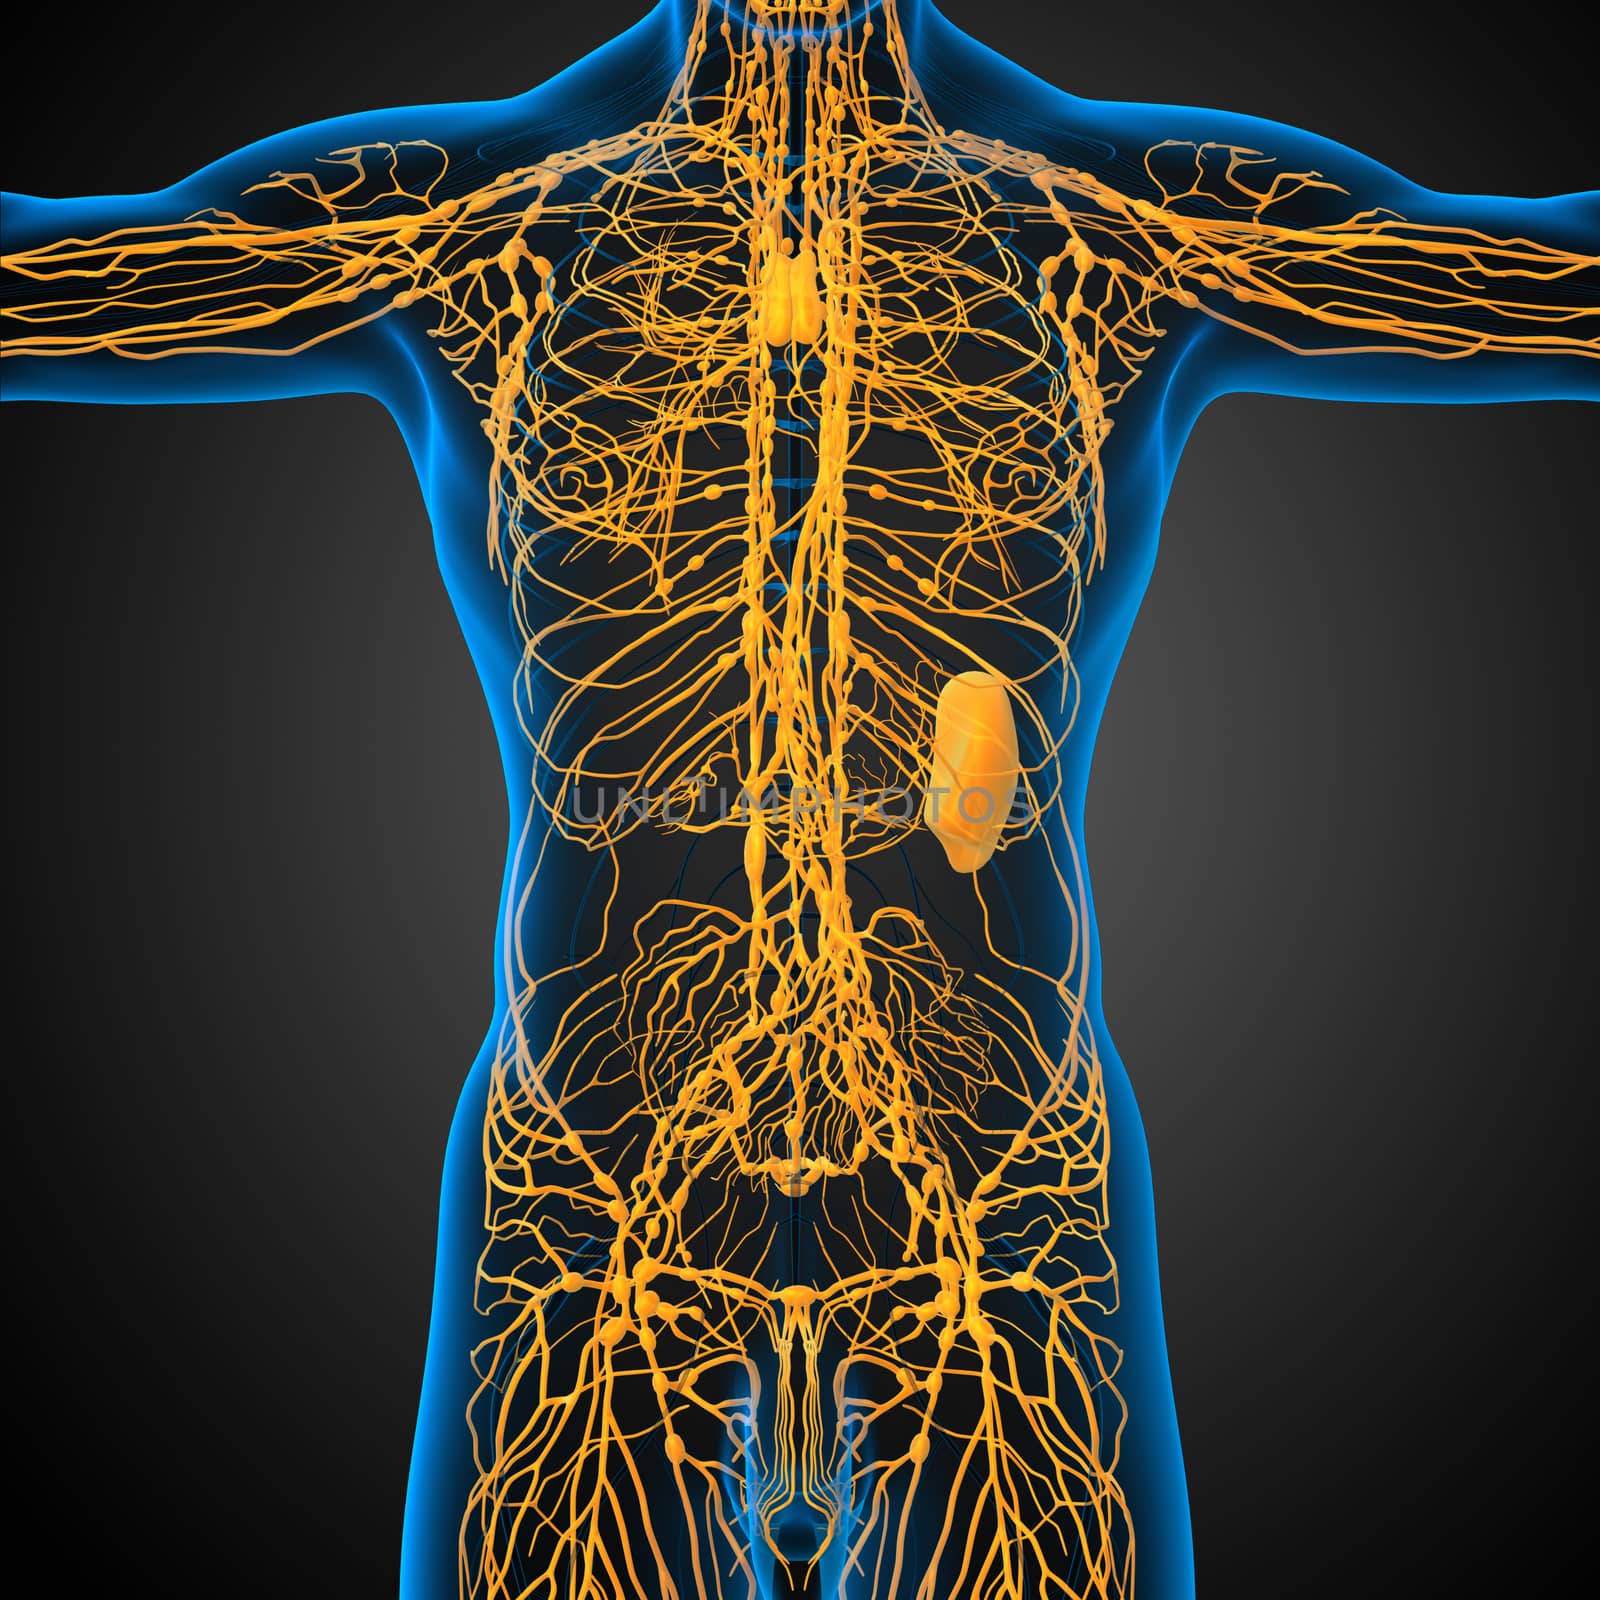 3d render medical illustration of the lymphatic system by maya2008